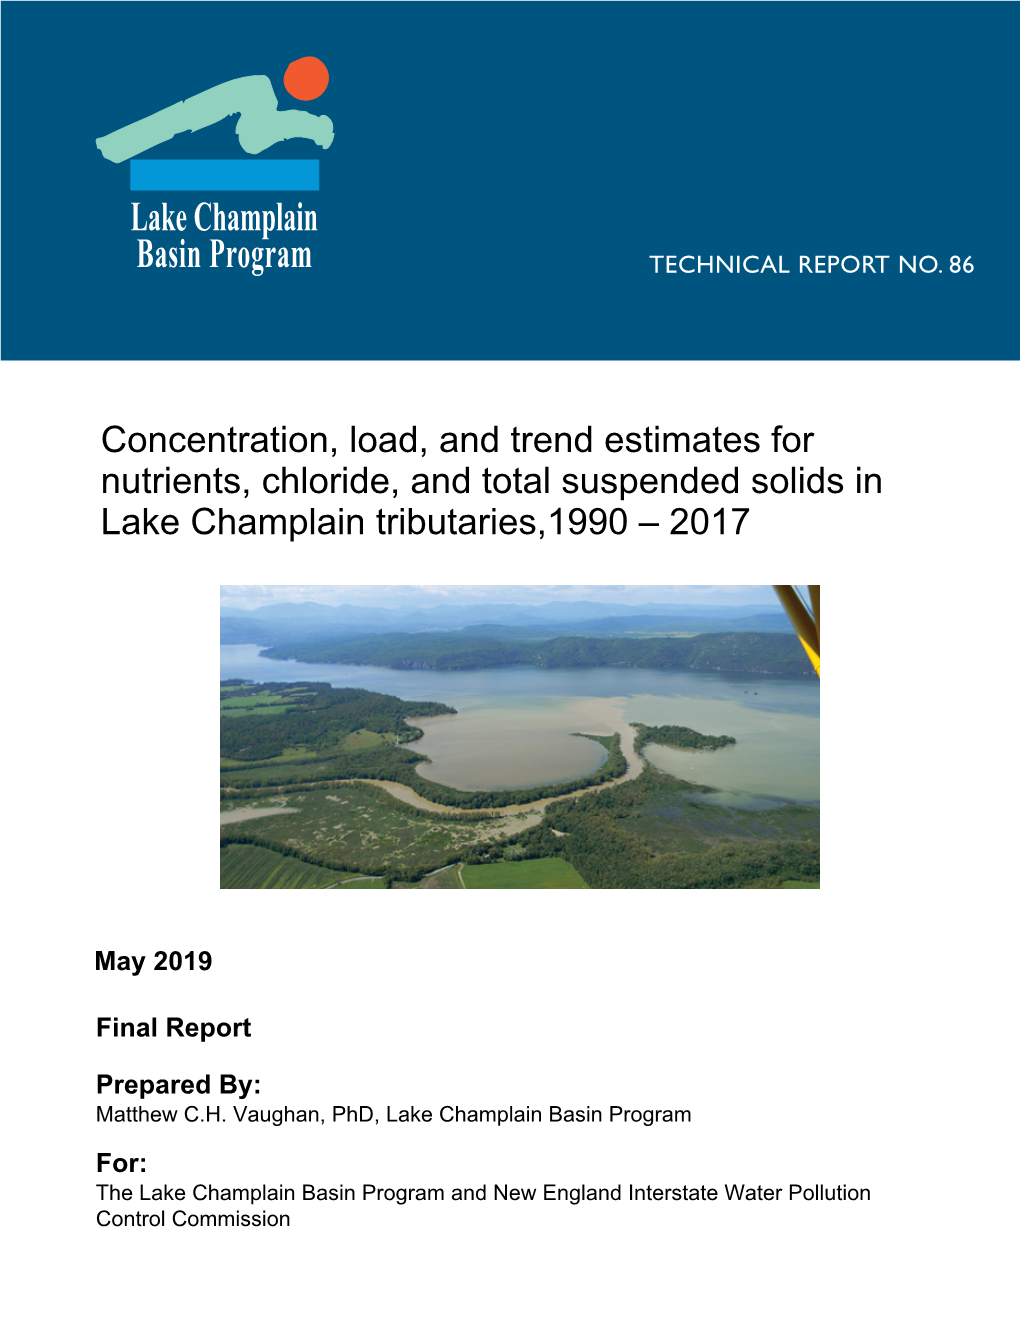 Tributary Loads Several Past Efforts Have Calculated Concentrations, Loads, and Trends for Lake Champlain Tributaries